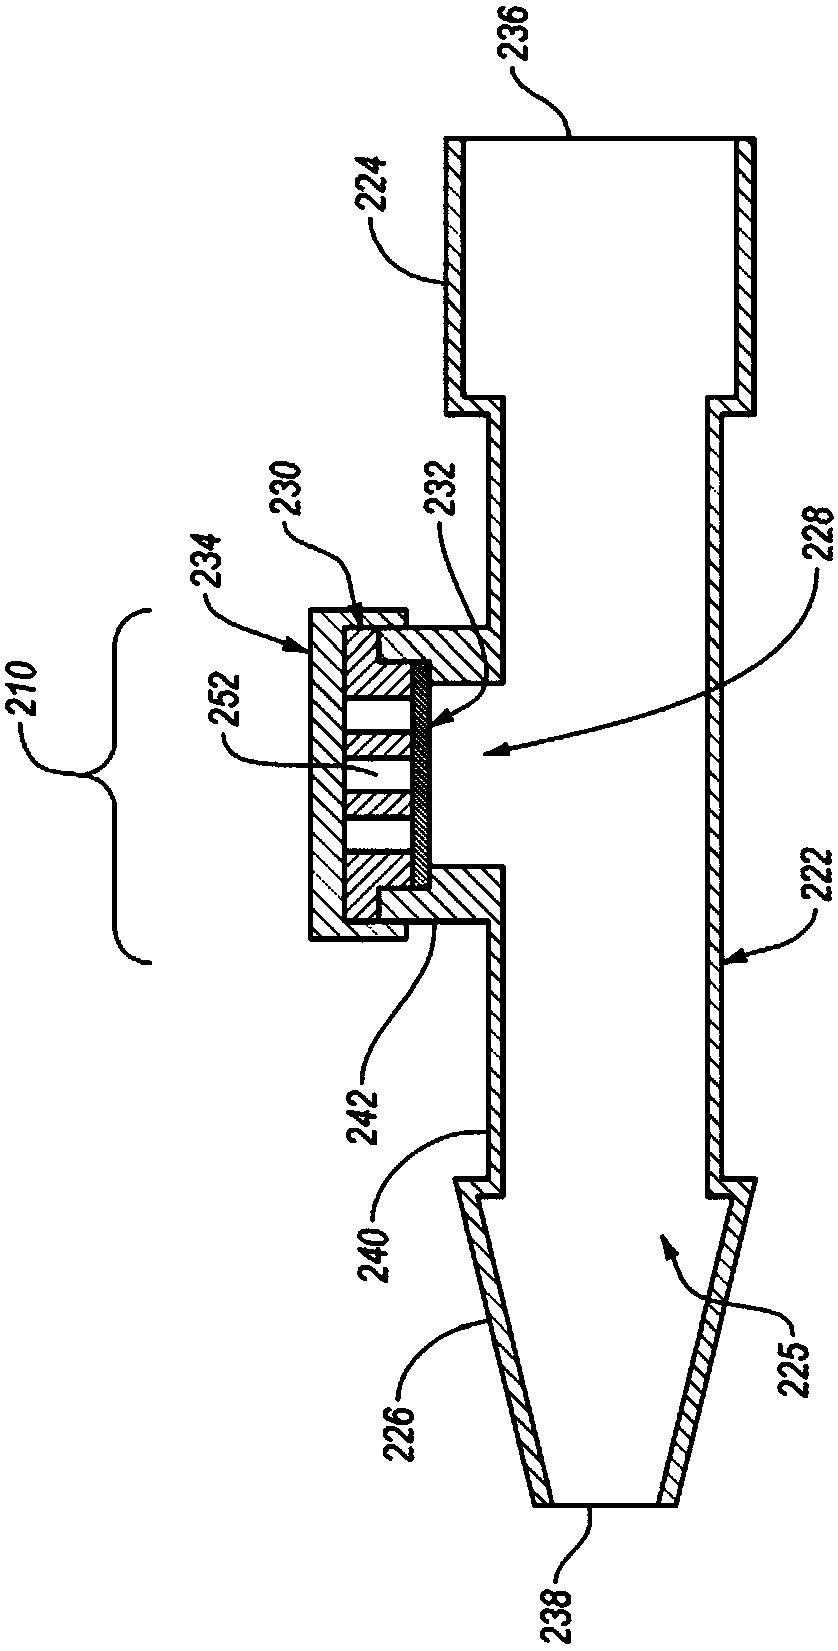 Vent adaptor assemblies, methods of making the same, methods of using the same, and urinary drainage bag systems using the same